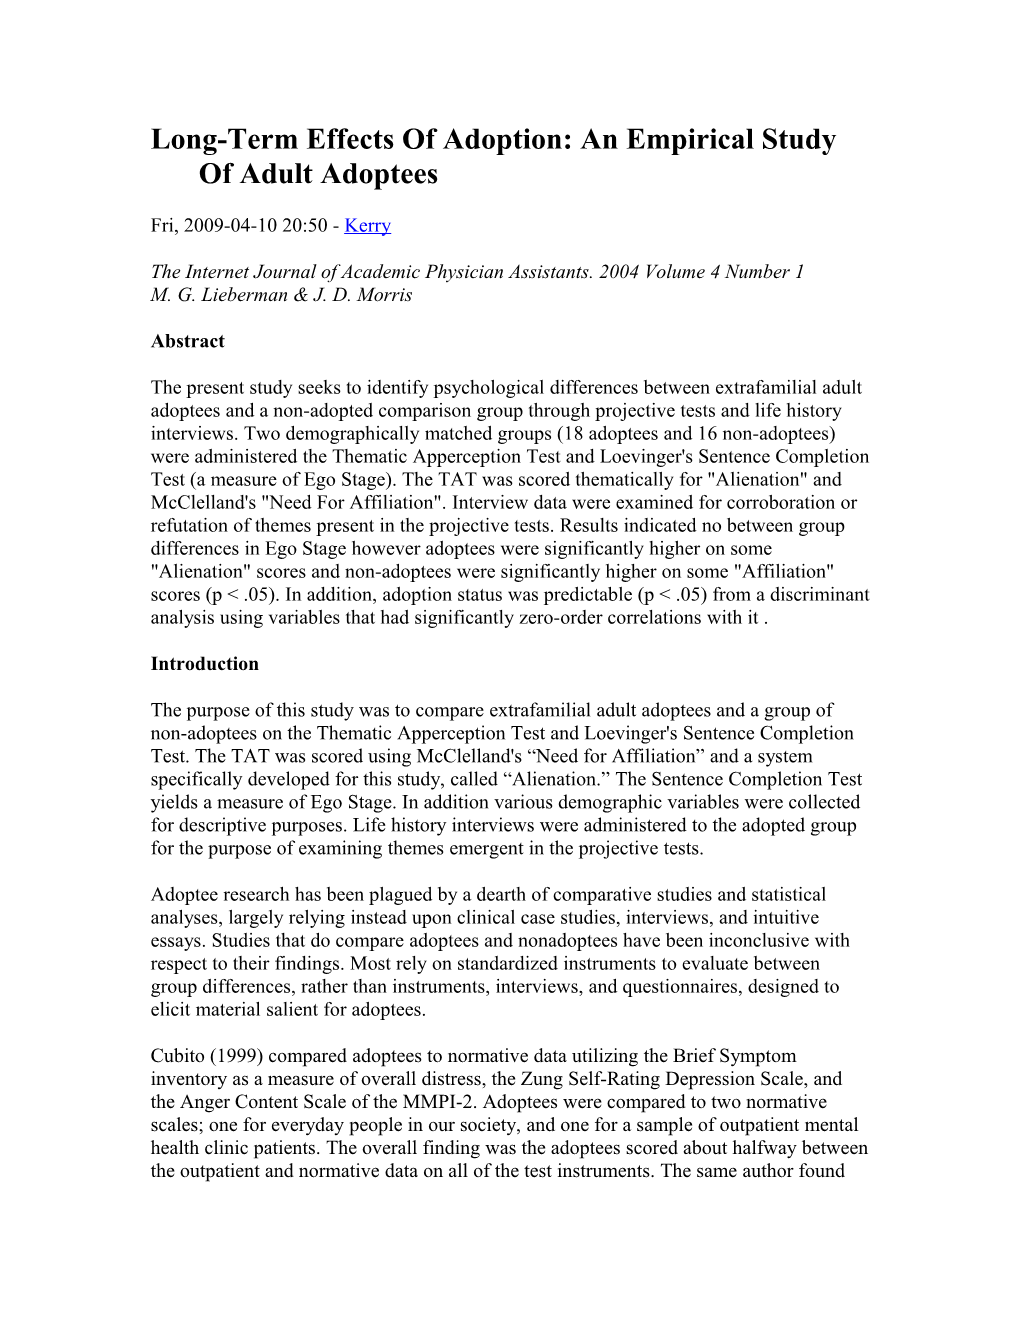 Long-Term Effects of Adoption: an Empirical Study of Adult Adoptees